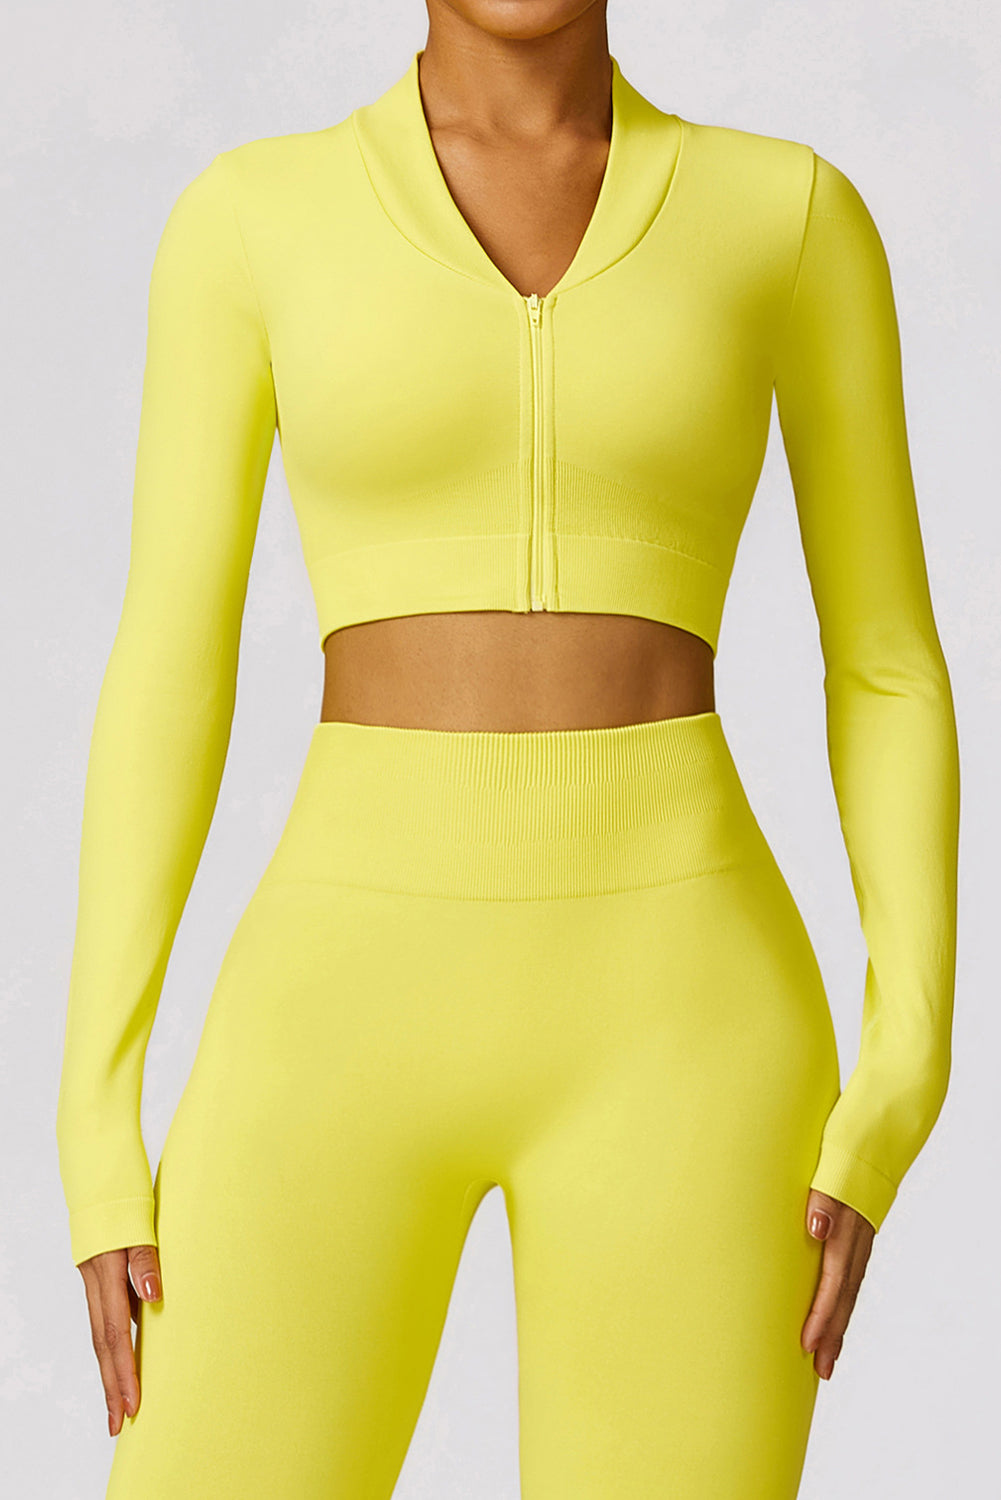 Yellow Long Sleeve Crop Top and Flare Pants Workout Set